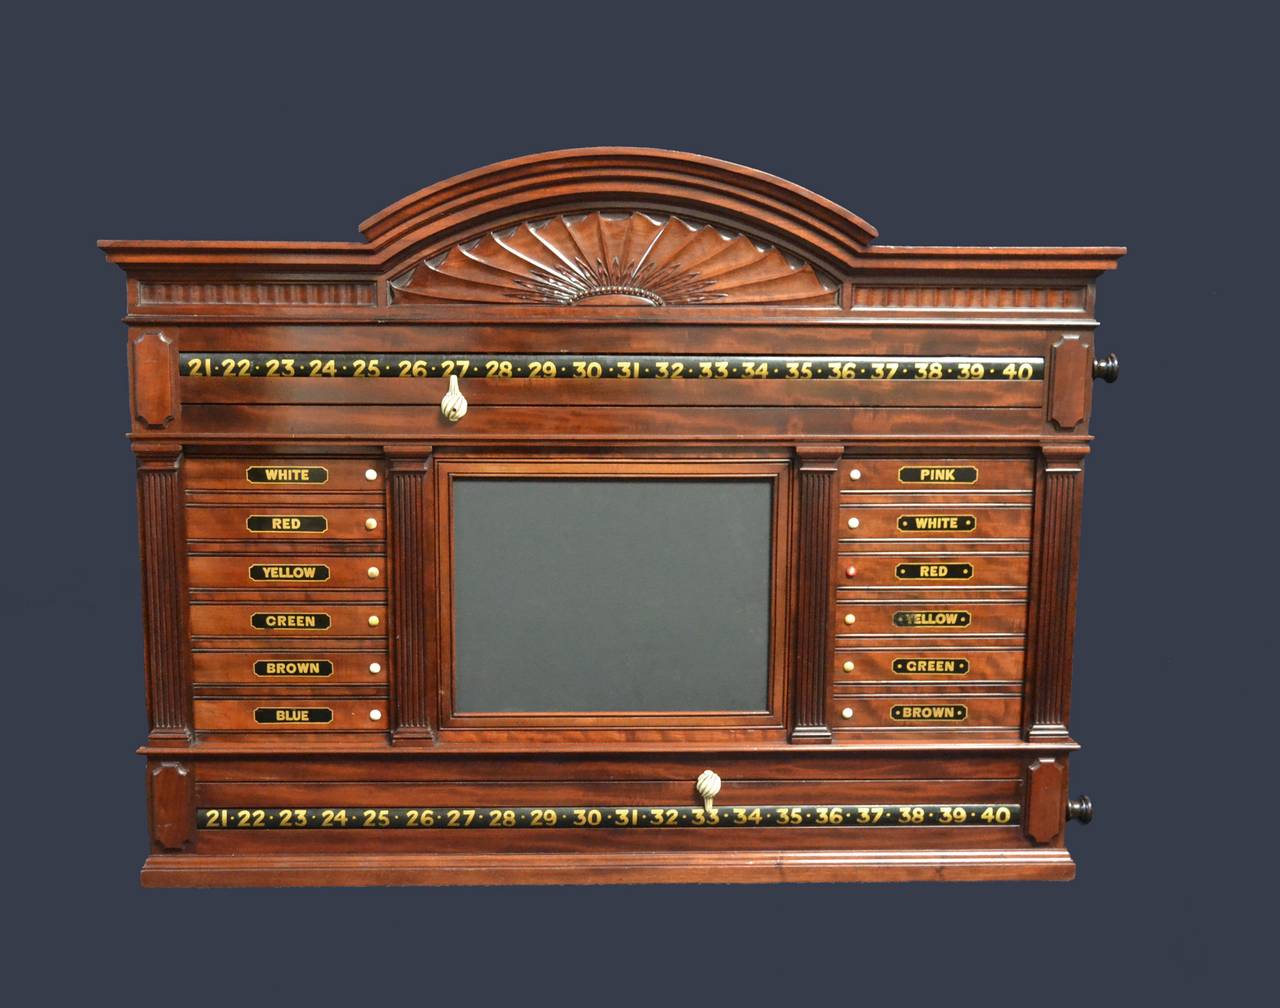 A wonderfully crafted Billiard- Snooker-pool  scoring cabinet in feathered mahogany probably by Burroughes & Watts of London, Circa 1900.

A decorative fan shaped carved pediment of linen fold relief above revolving number bars and lettered